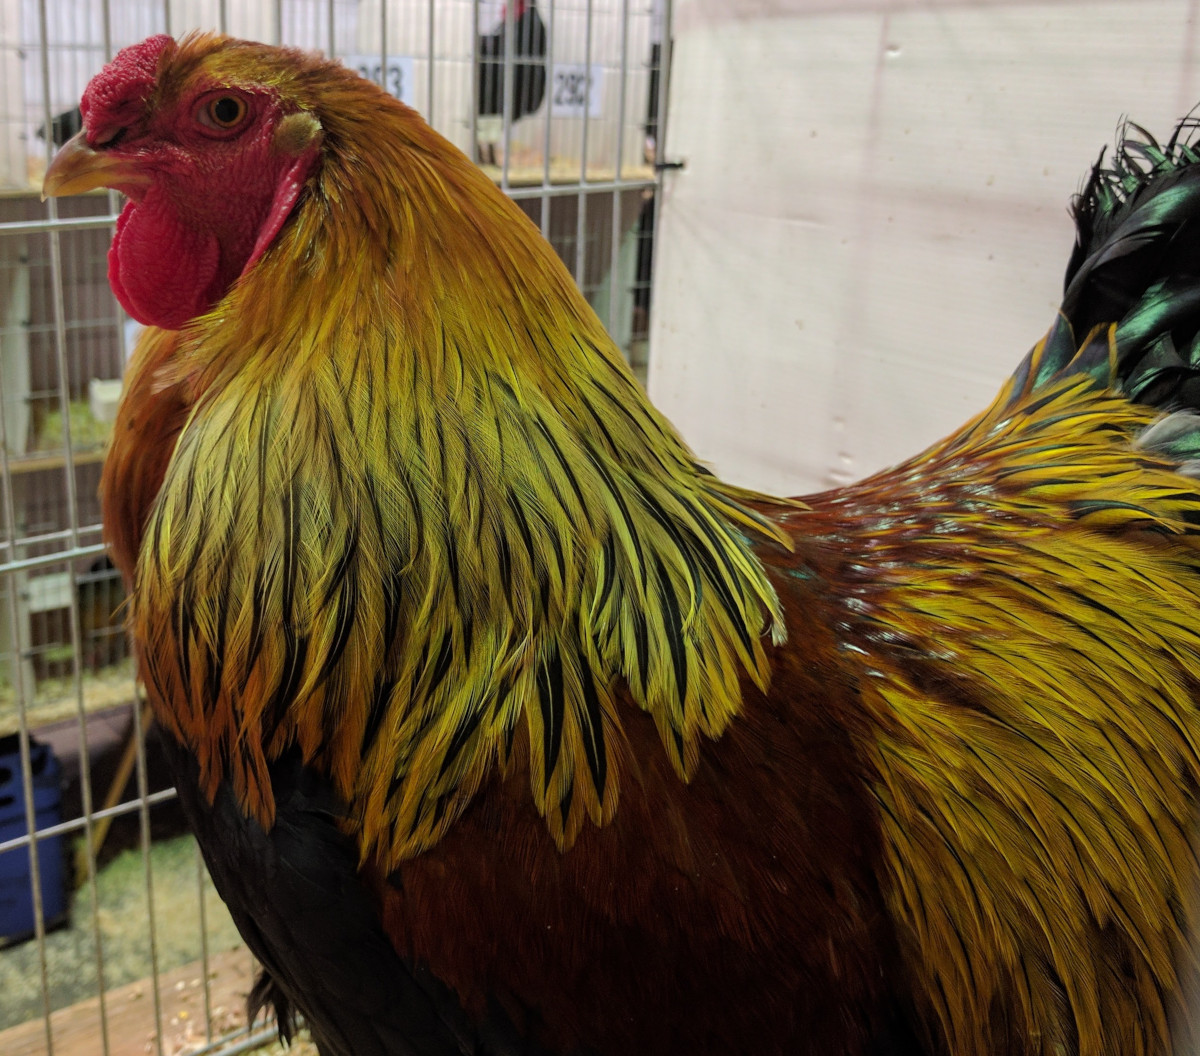 A close up photo of the Brahma at a poultry show.